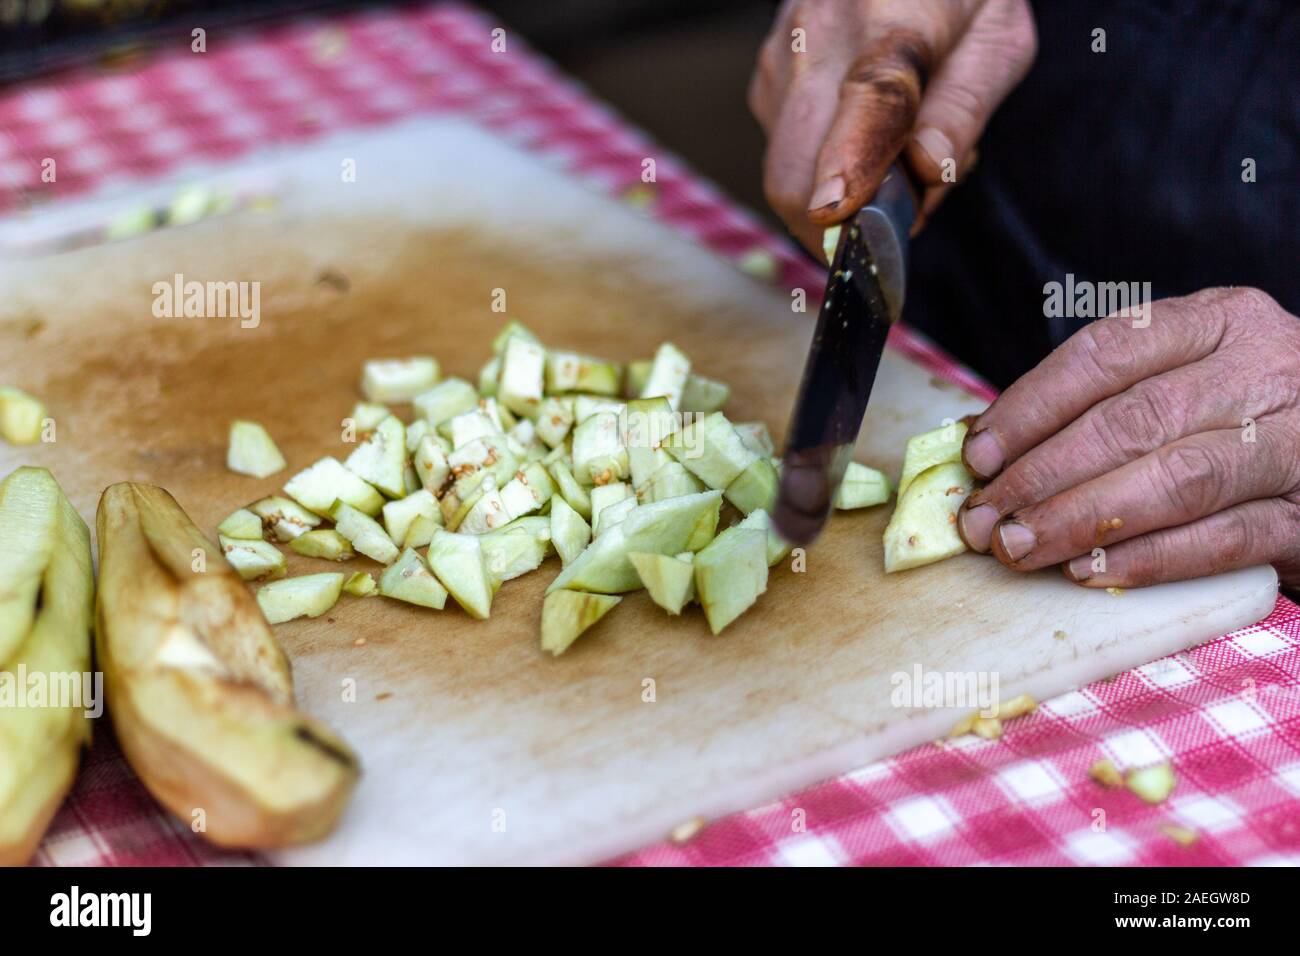 Senior woman hand cutting and chopping eggplant. Real life Stock Photo